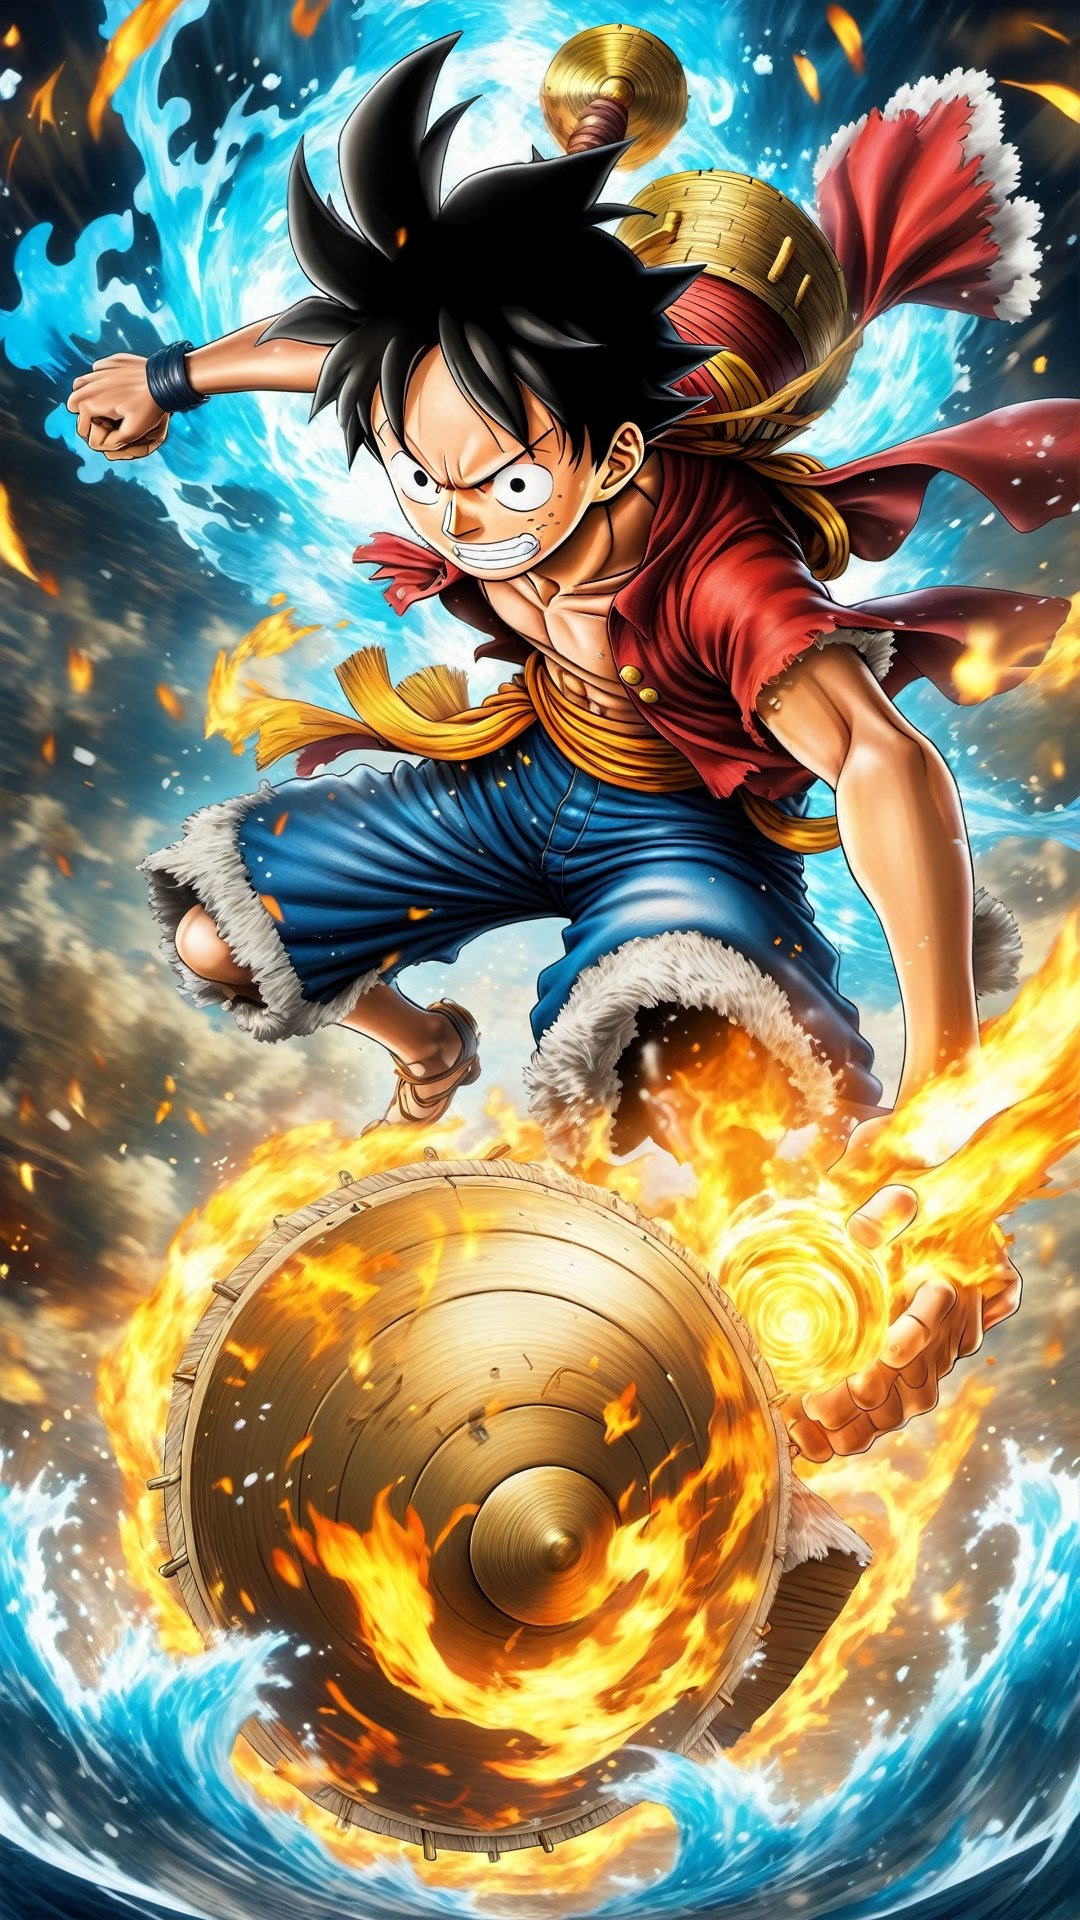 Design a stylized representation of Luffy in his ((Gear form)), infused with the elemental fury of nature. Surround him with a swirling maelstrom of energy, each element personified in the form of fire, water, earth, and air. Craft the artwork in a ((cinematic short)) format to accentuate the elemental chaos. Utilize a wide ((dynamic range)) to illuminate the vivid colors and intricate elemental details. Experiment with a ((dynamic viewing angle)) to emphasize Luffy's mastery over these forces. Render the image in an impressive ((8K)) resolution with a ((16-bit color)) palette, capturing the dynamic interplay of elements and Luffy's commanding presence.